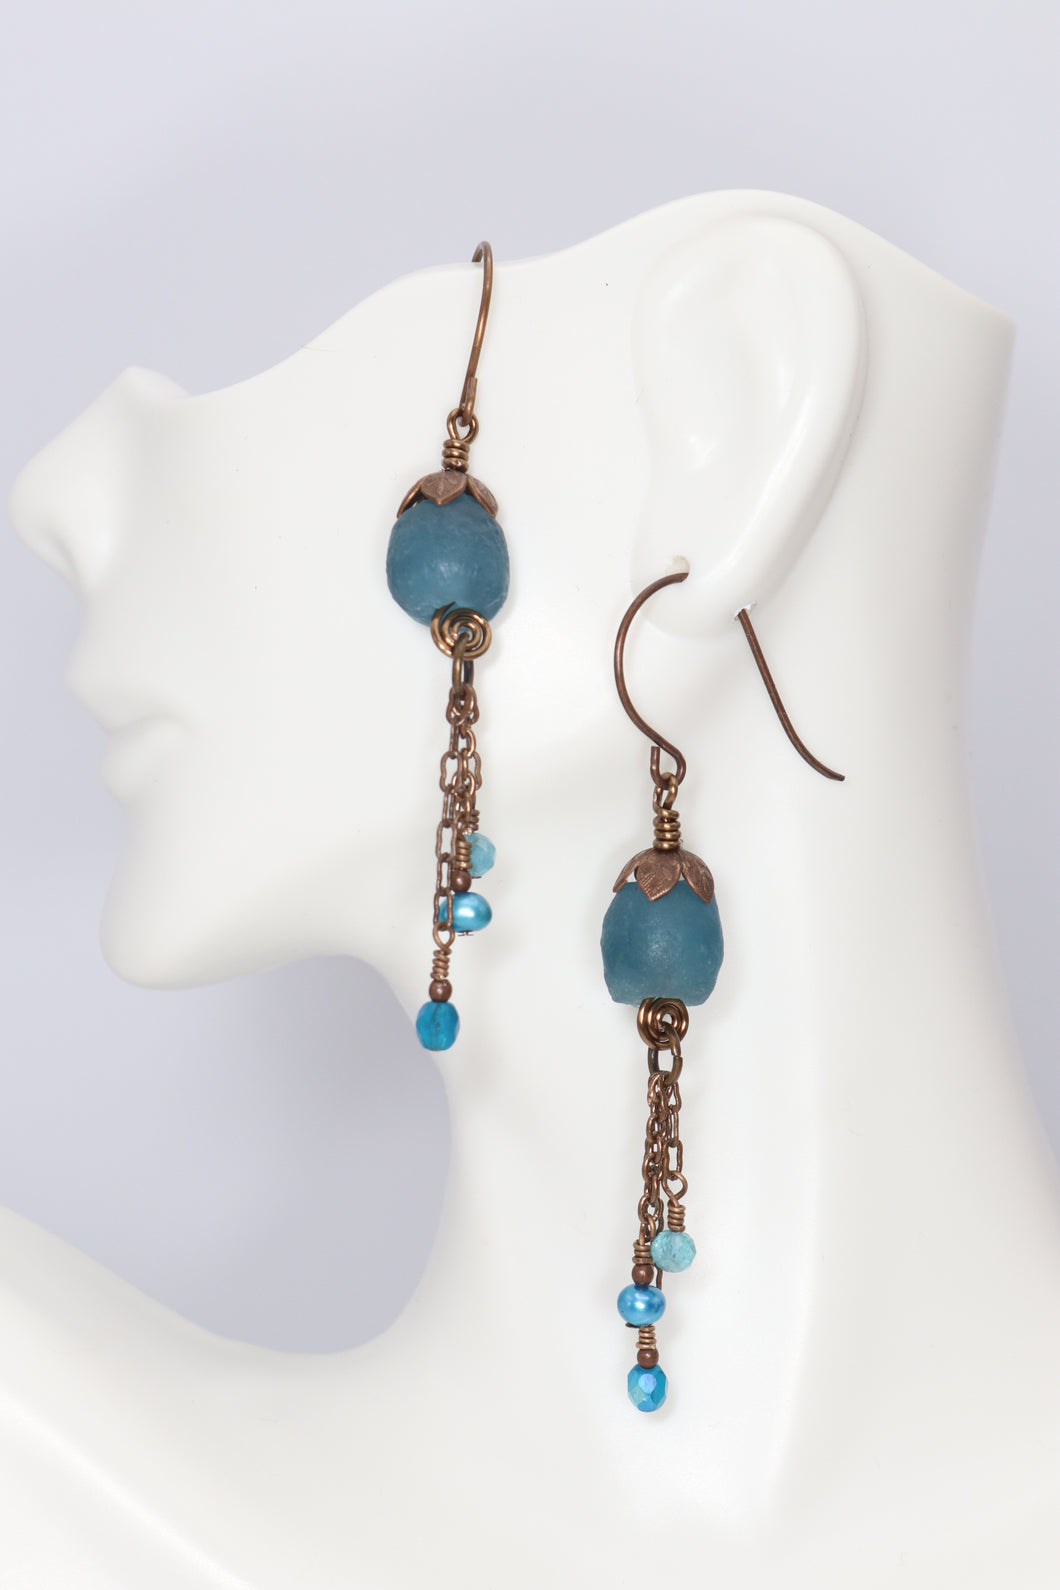 teal recycled glass beads accented with detailed petal like antiqued brass bead caps with chain dangles hanging from brass spirals.  The dangles feature dainty apatite, freshwater pearls & Czech glass